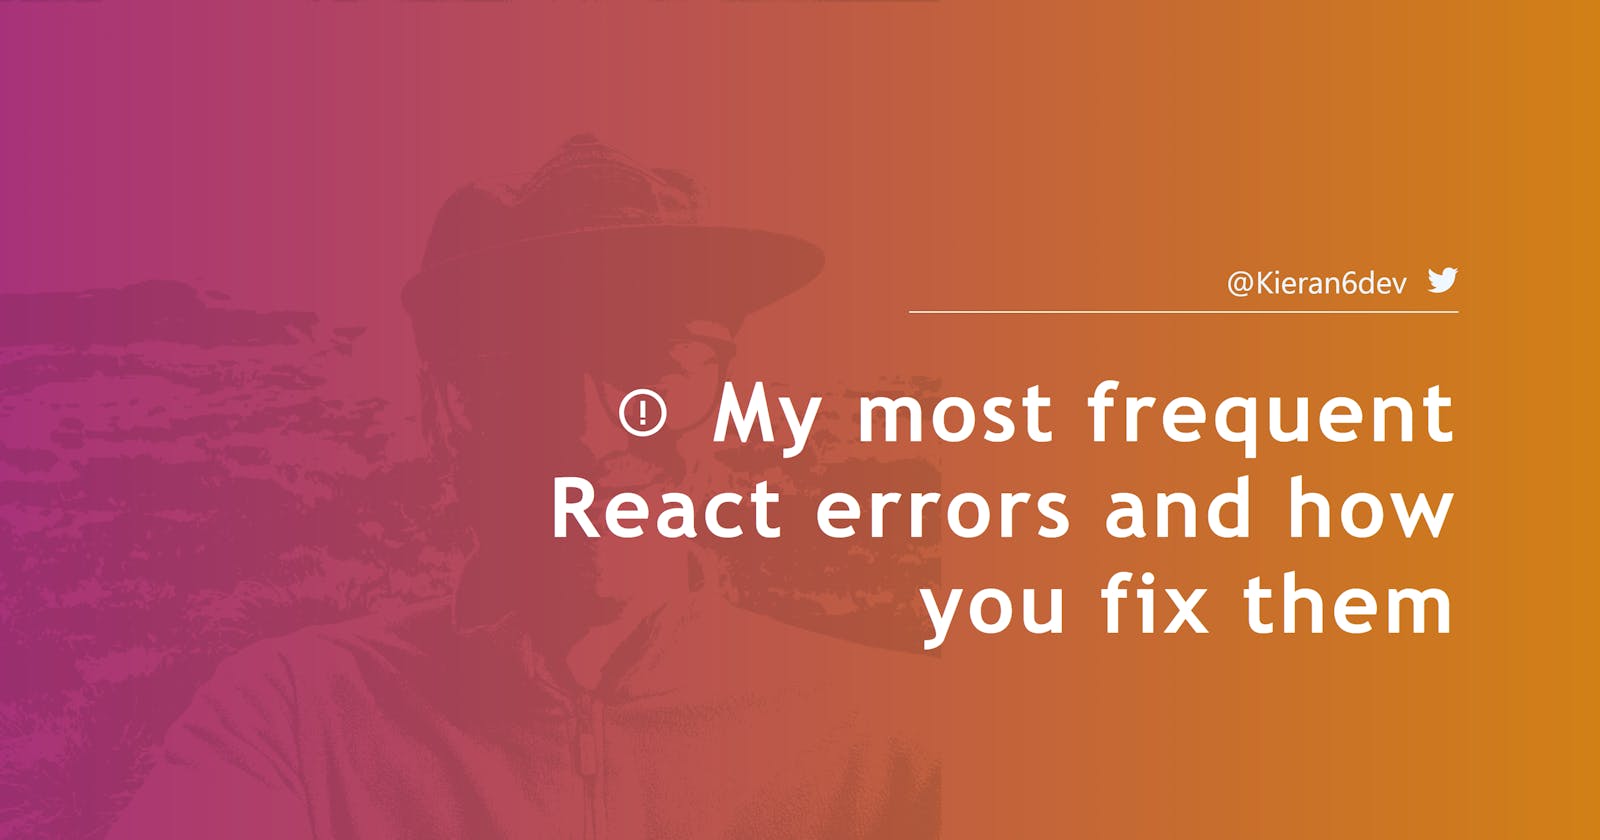 My most frequent React errors and how you fix them